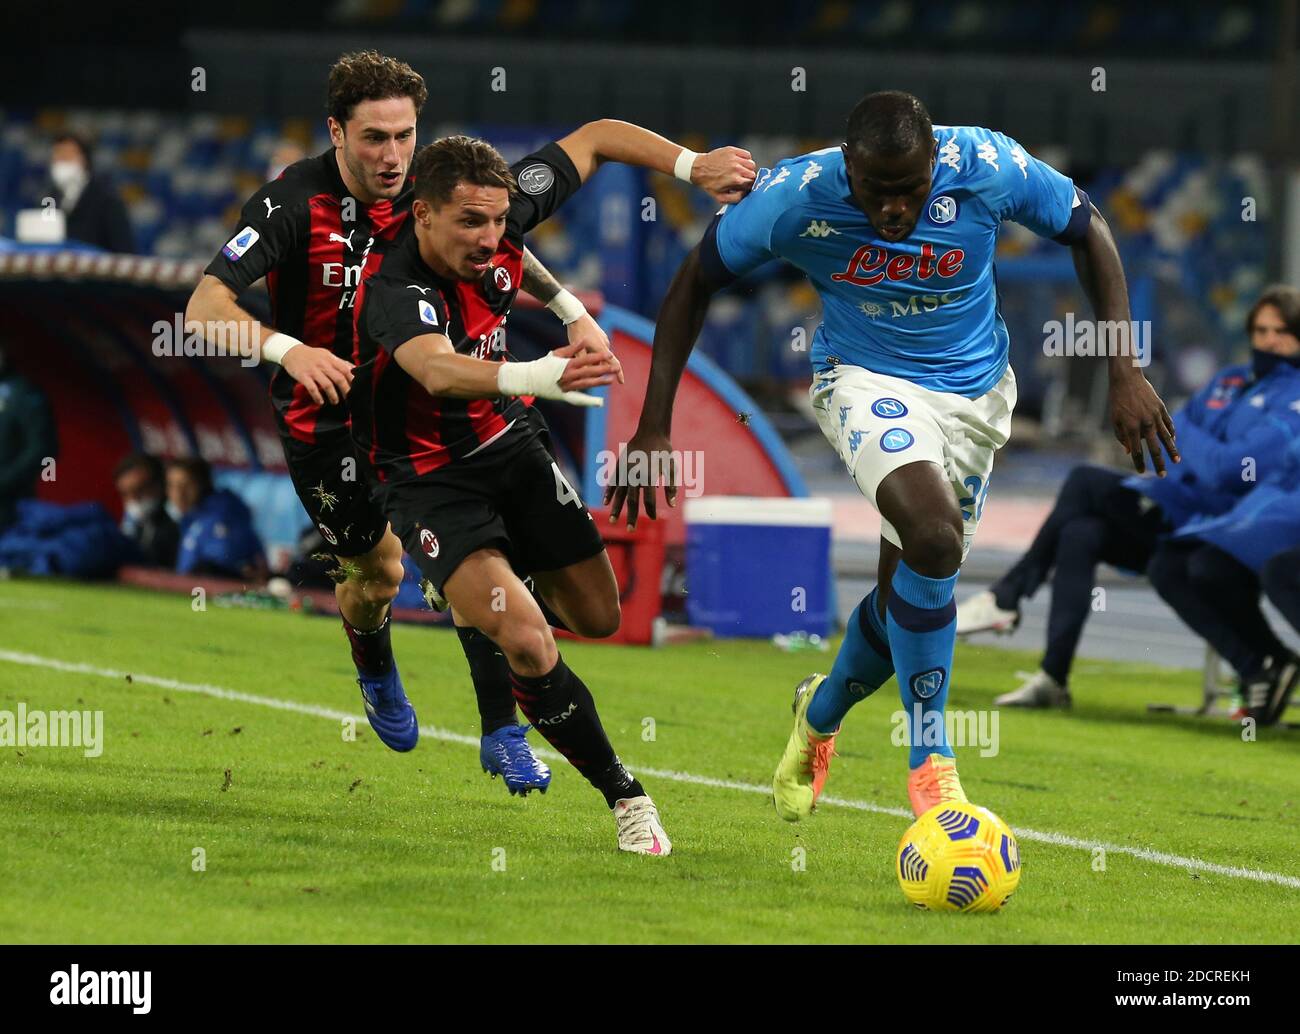 Naples, Italy. 22nd Nov, 2020. Napoli's Senegalese defender Kalidou Koulibaly fights for the ball with AC Milan's Algerian midfielder Ismael Bennacer (C) and AC Milan's Italian defender Davide Calabria (L) during the Serie A football match SSC Napoli vs AC Milan. AC Milan won 3-1. Credit: Independent Photo Agency/Alamy Live News Stock Photo